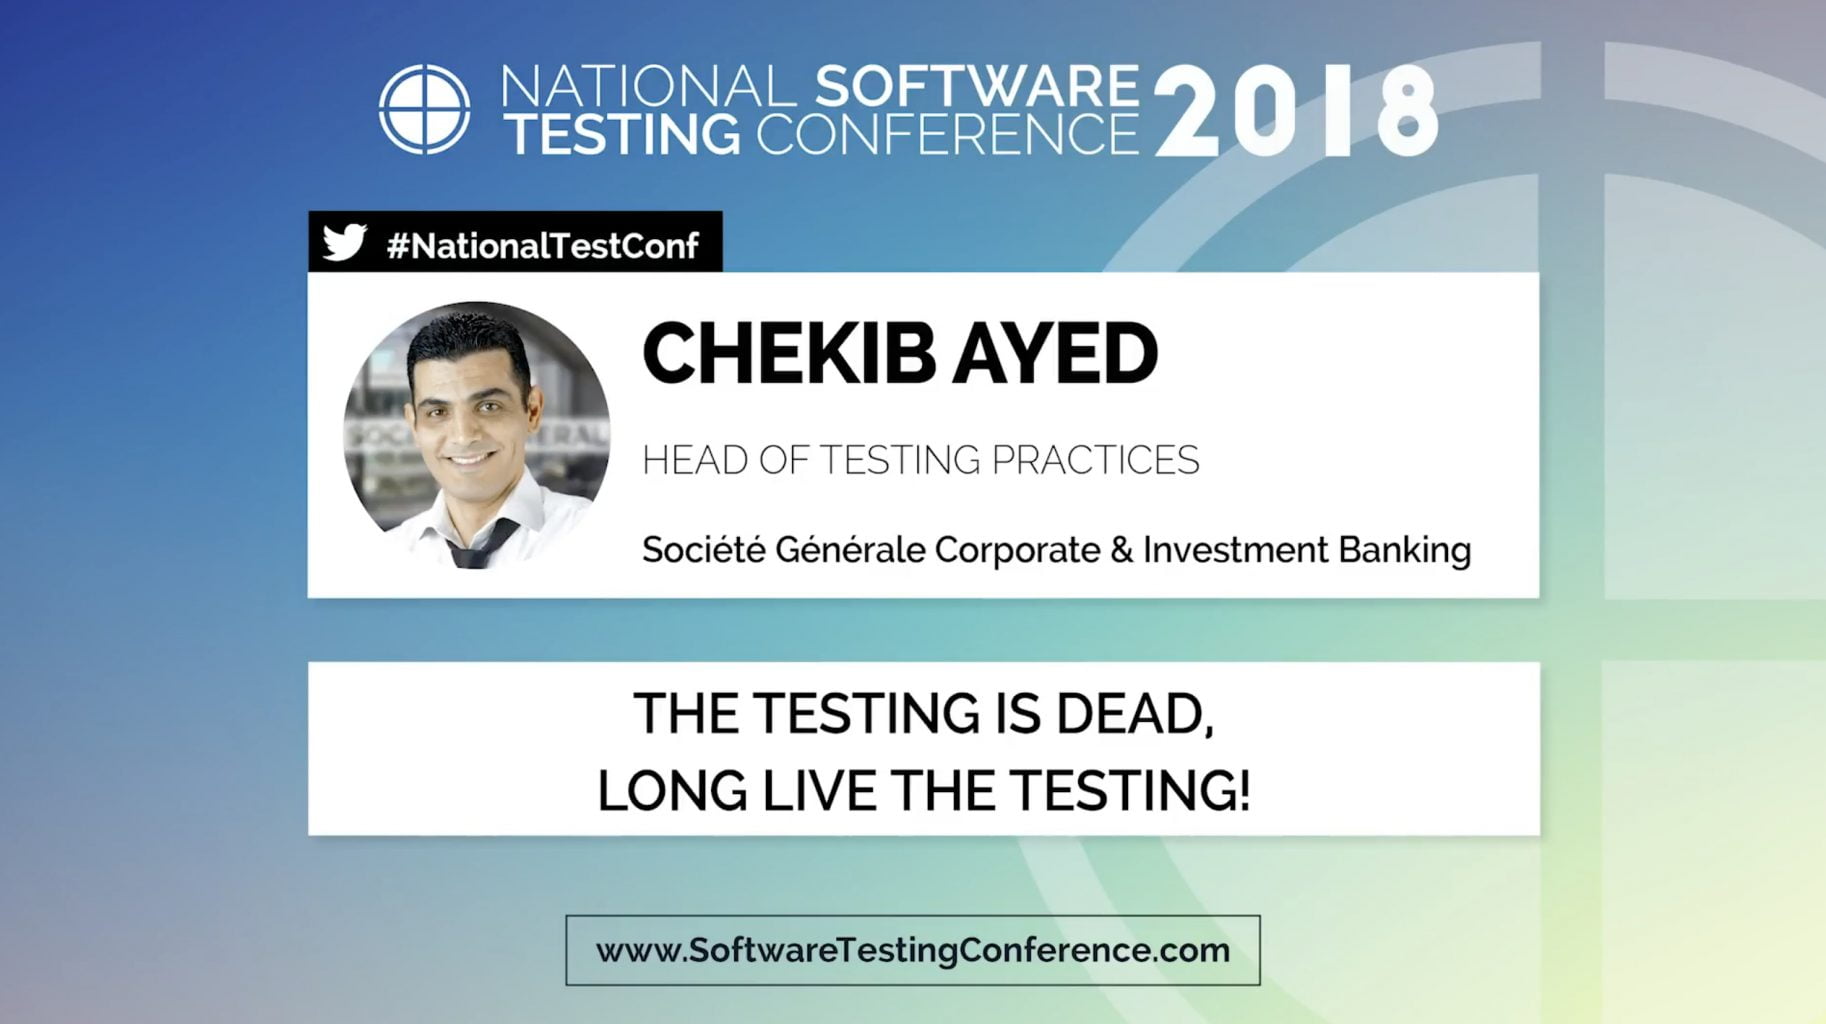 VIDEO Chekib Ayed - The testing is dead, long live the testing!